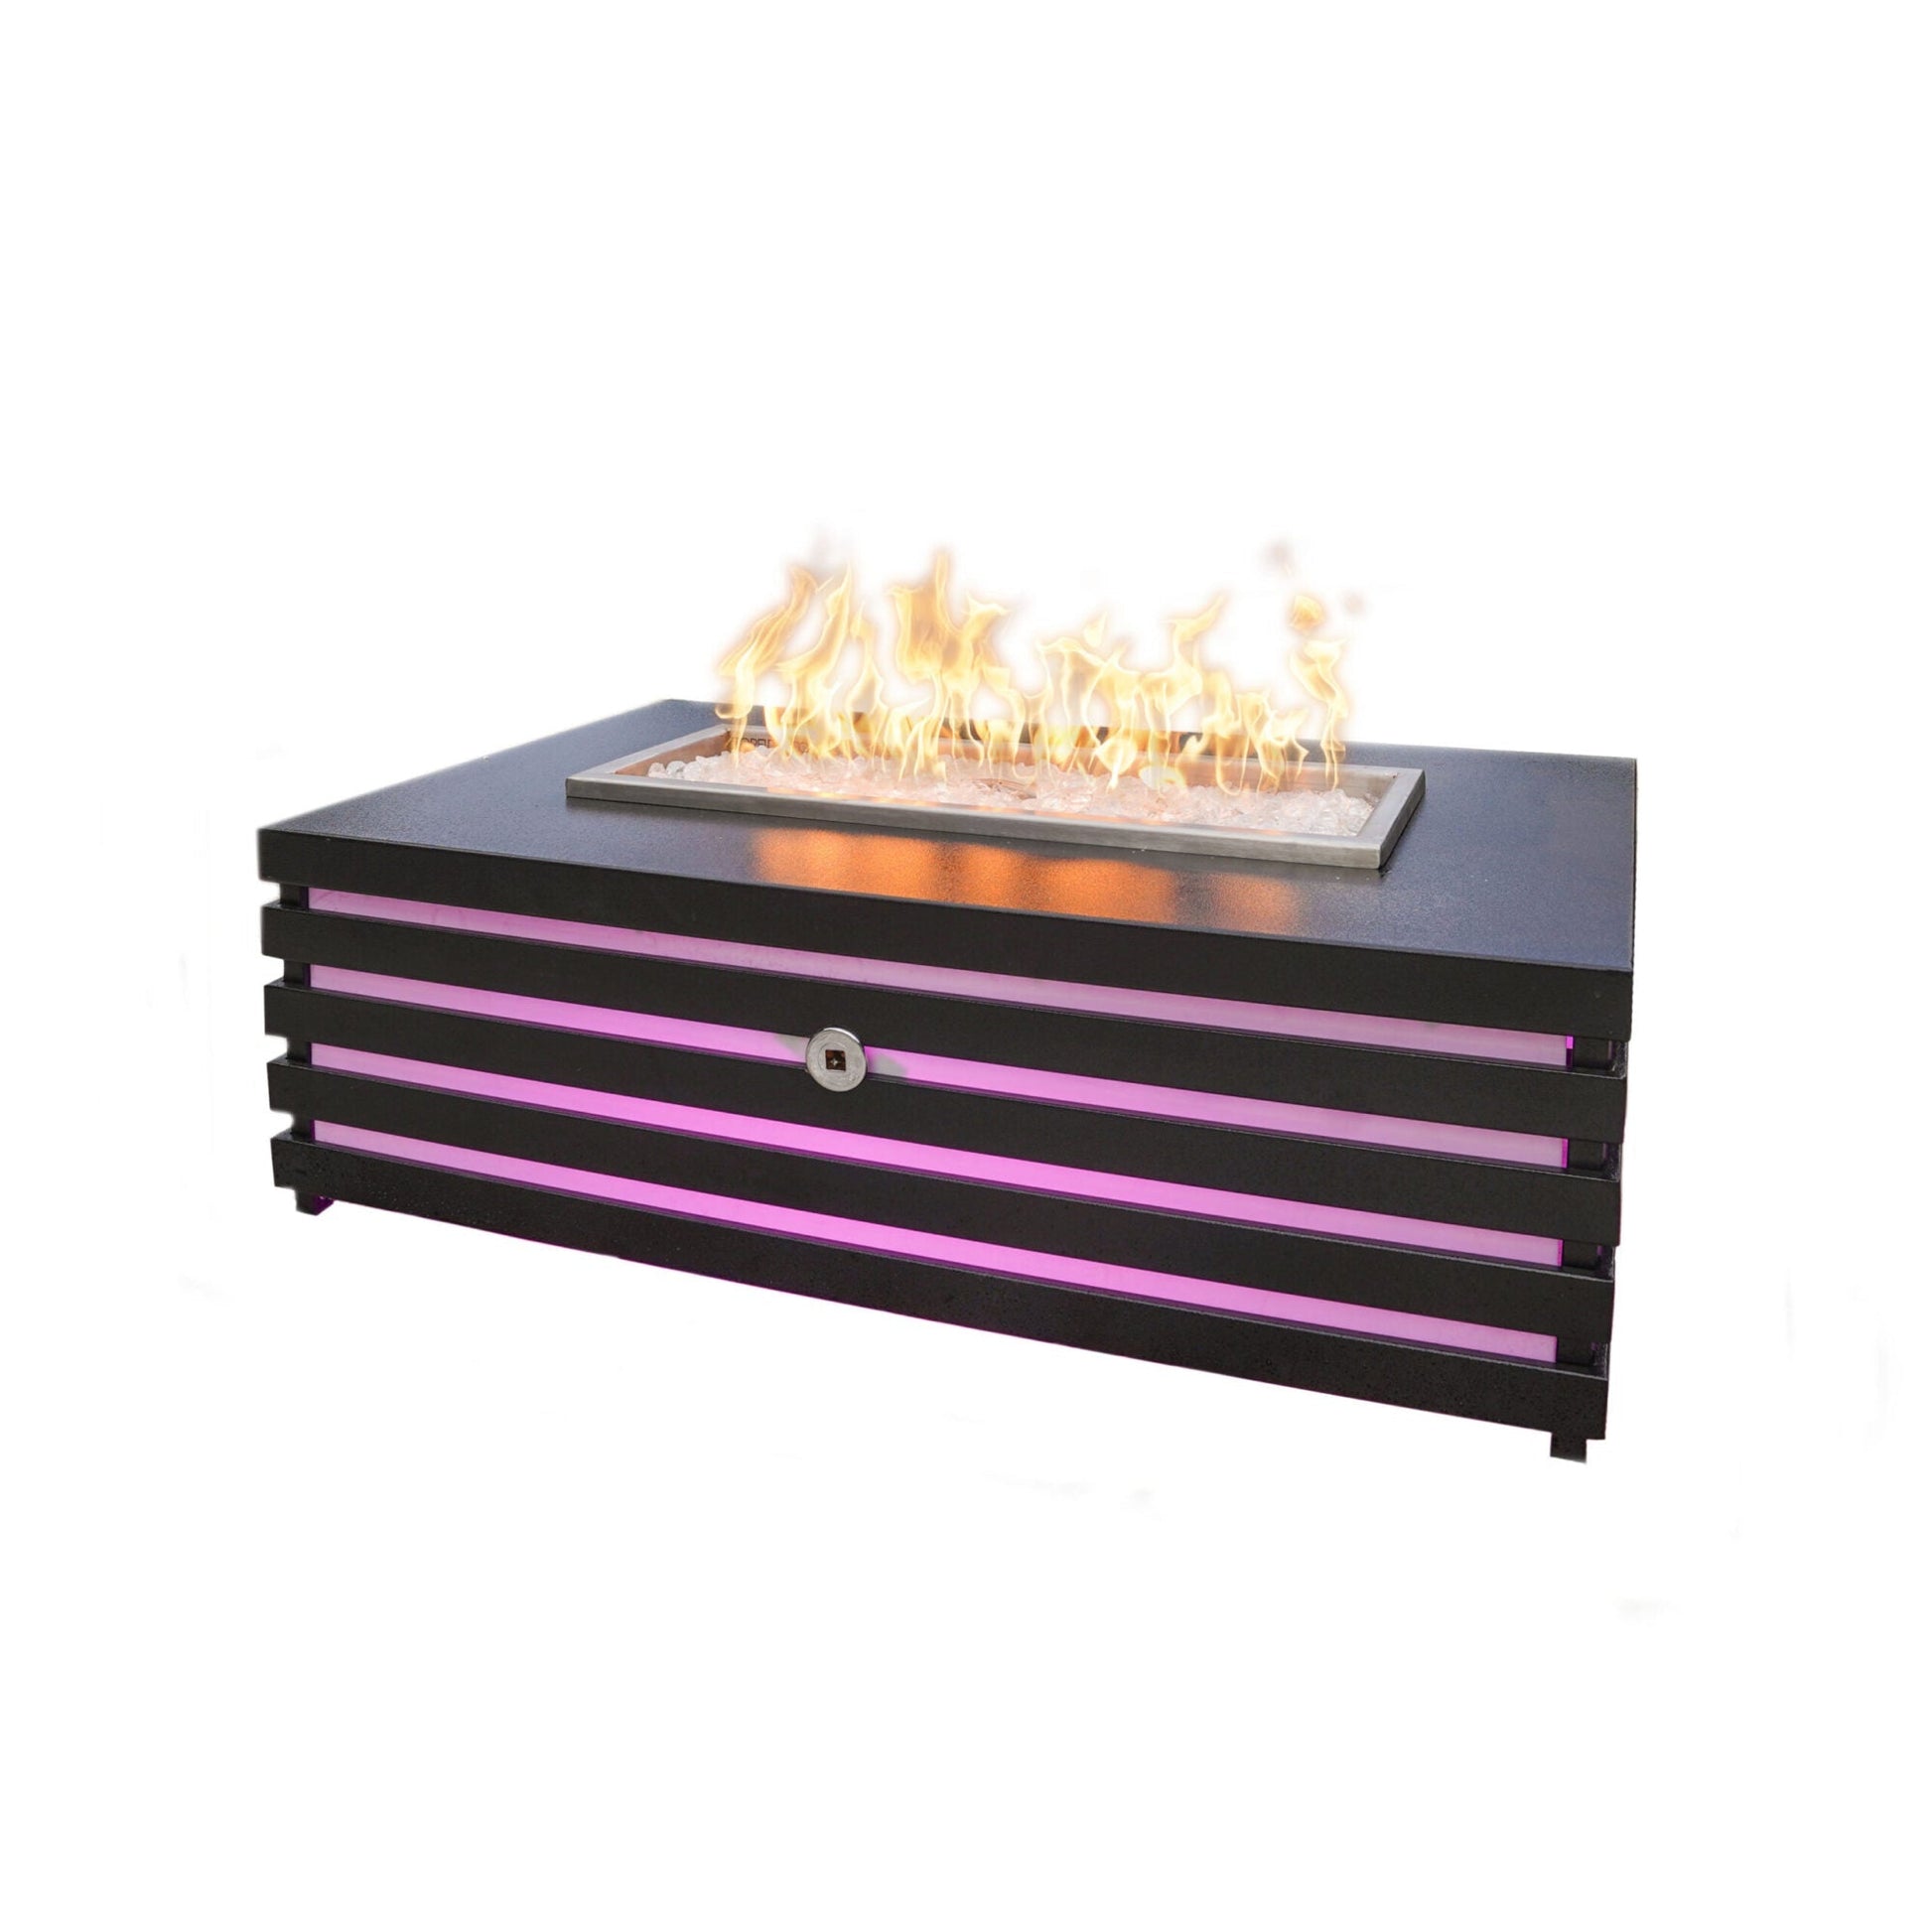 The Outdoor Plus Amina 72" Black Powder Coated Natural Gas Fire Pit with 12V Electronic Ignition